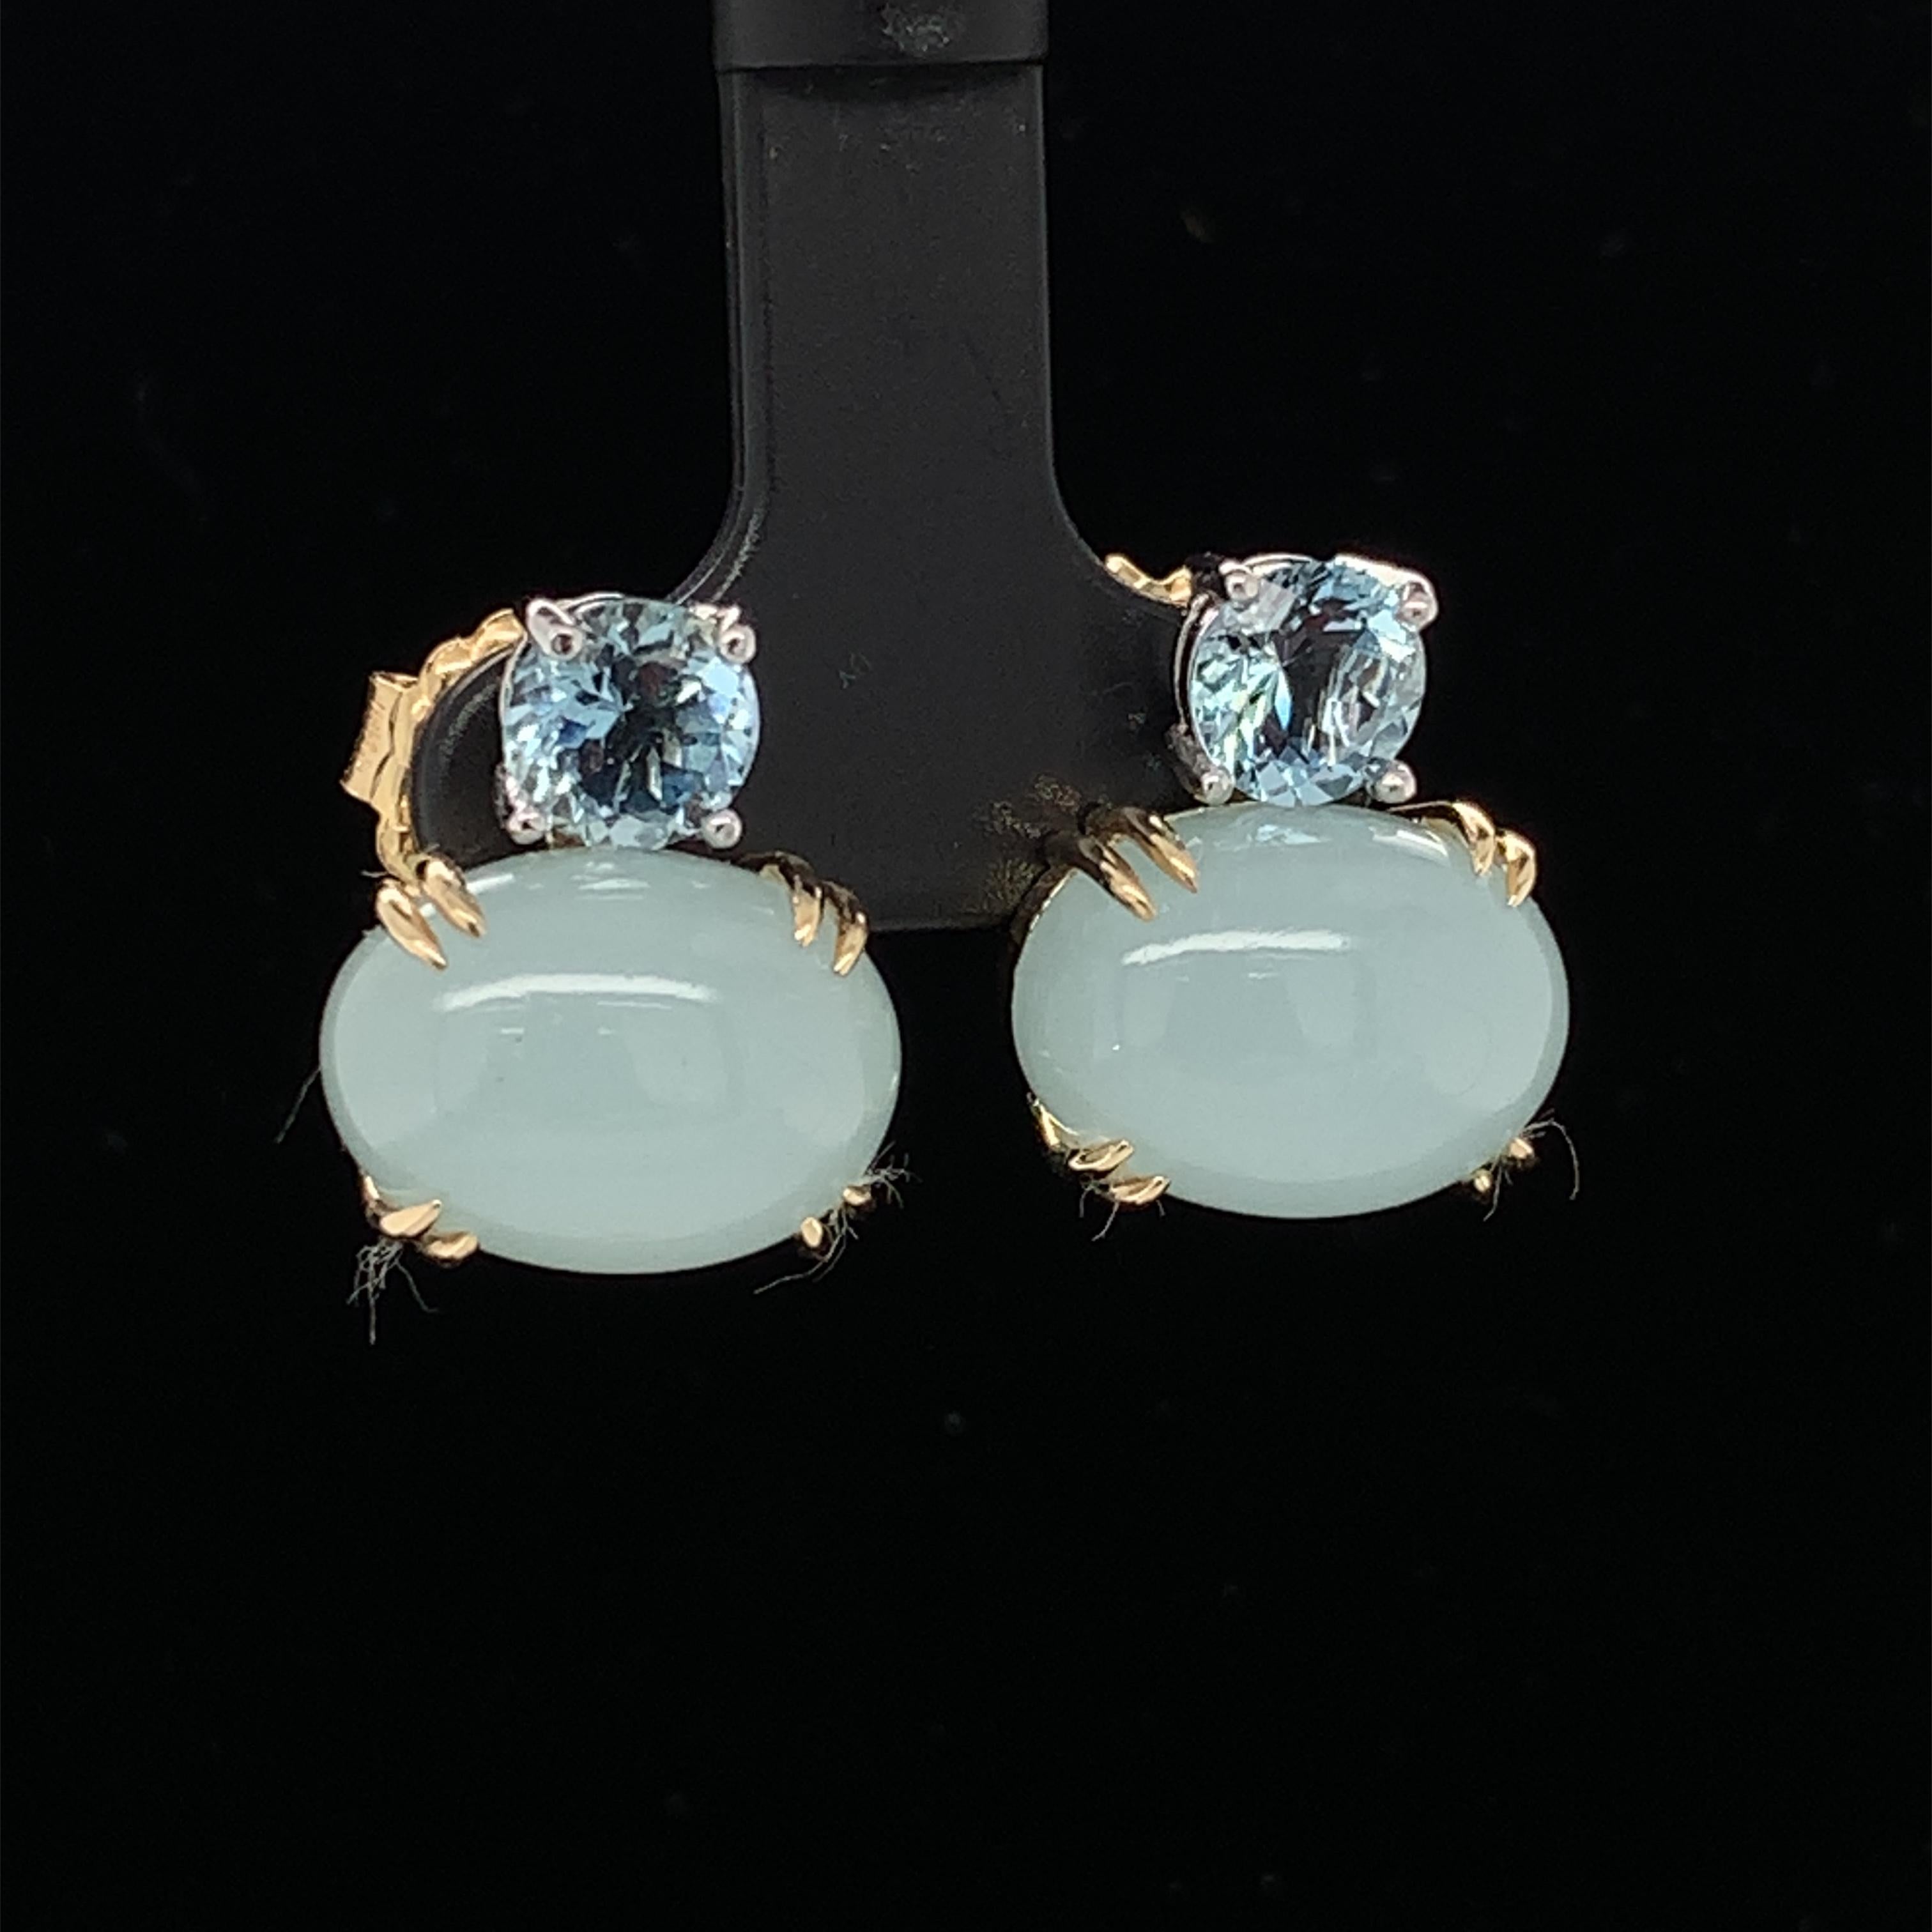 These lovely 18k two-toned gold earrings feature aquamarine in both faceted rounds and oval cabochons. The round faceted aquamarine are a beautifully crystalline, brilliant shade of sparkling medium blue, while the oval cabochons are a gorgeously